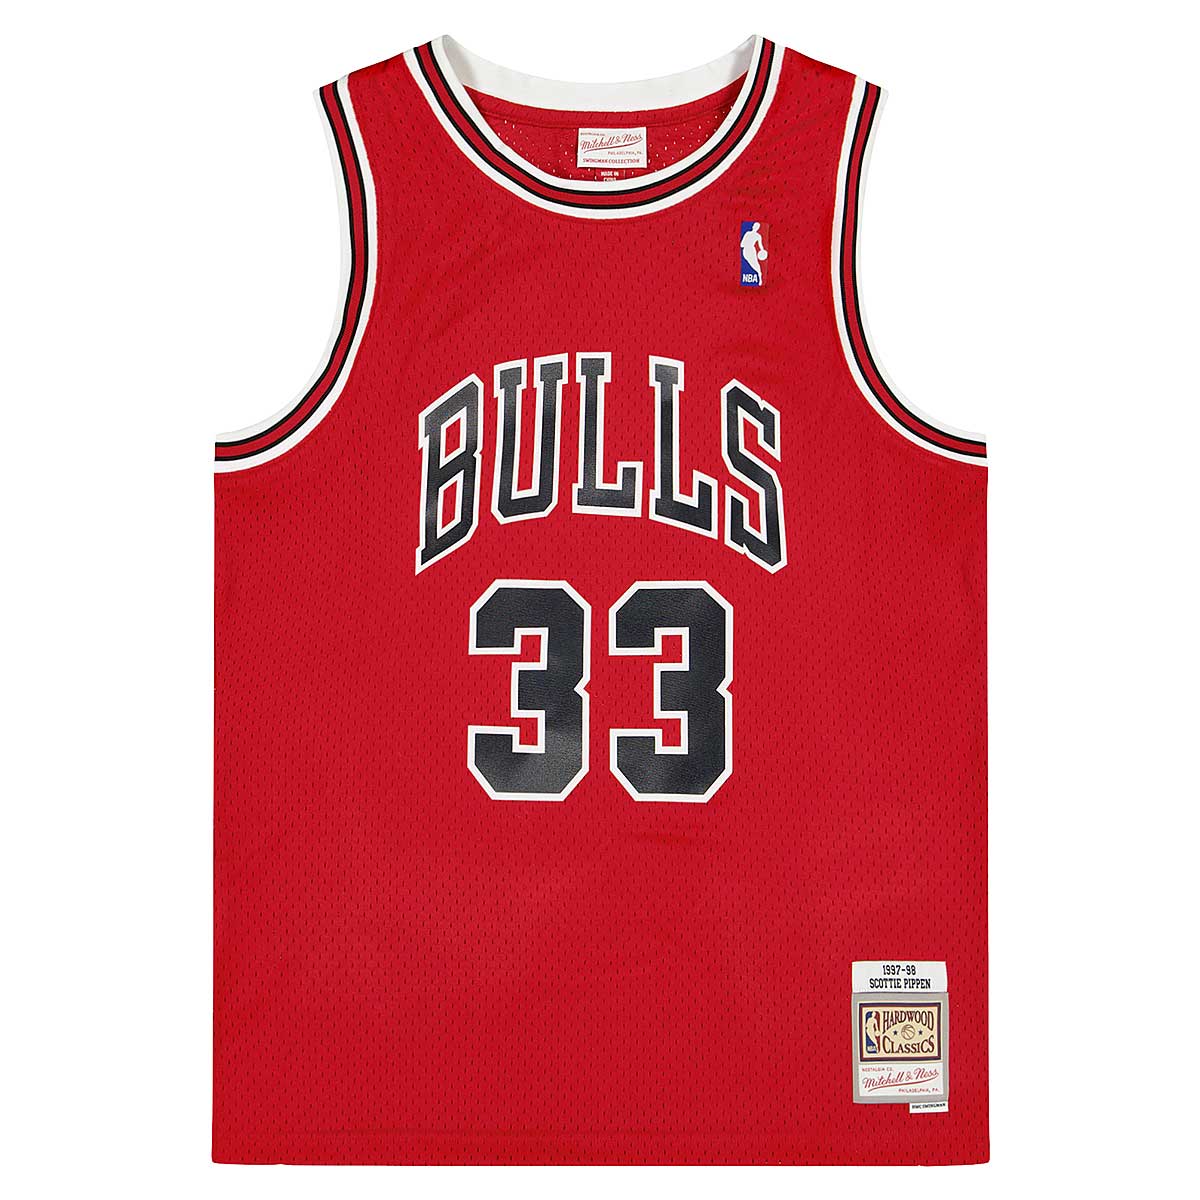 Mens New American Basketball Jerseys Clothes #33 Scottie Pippen